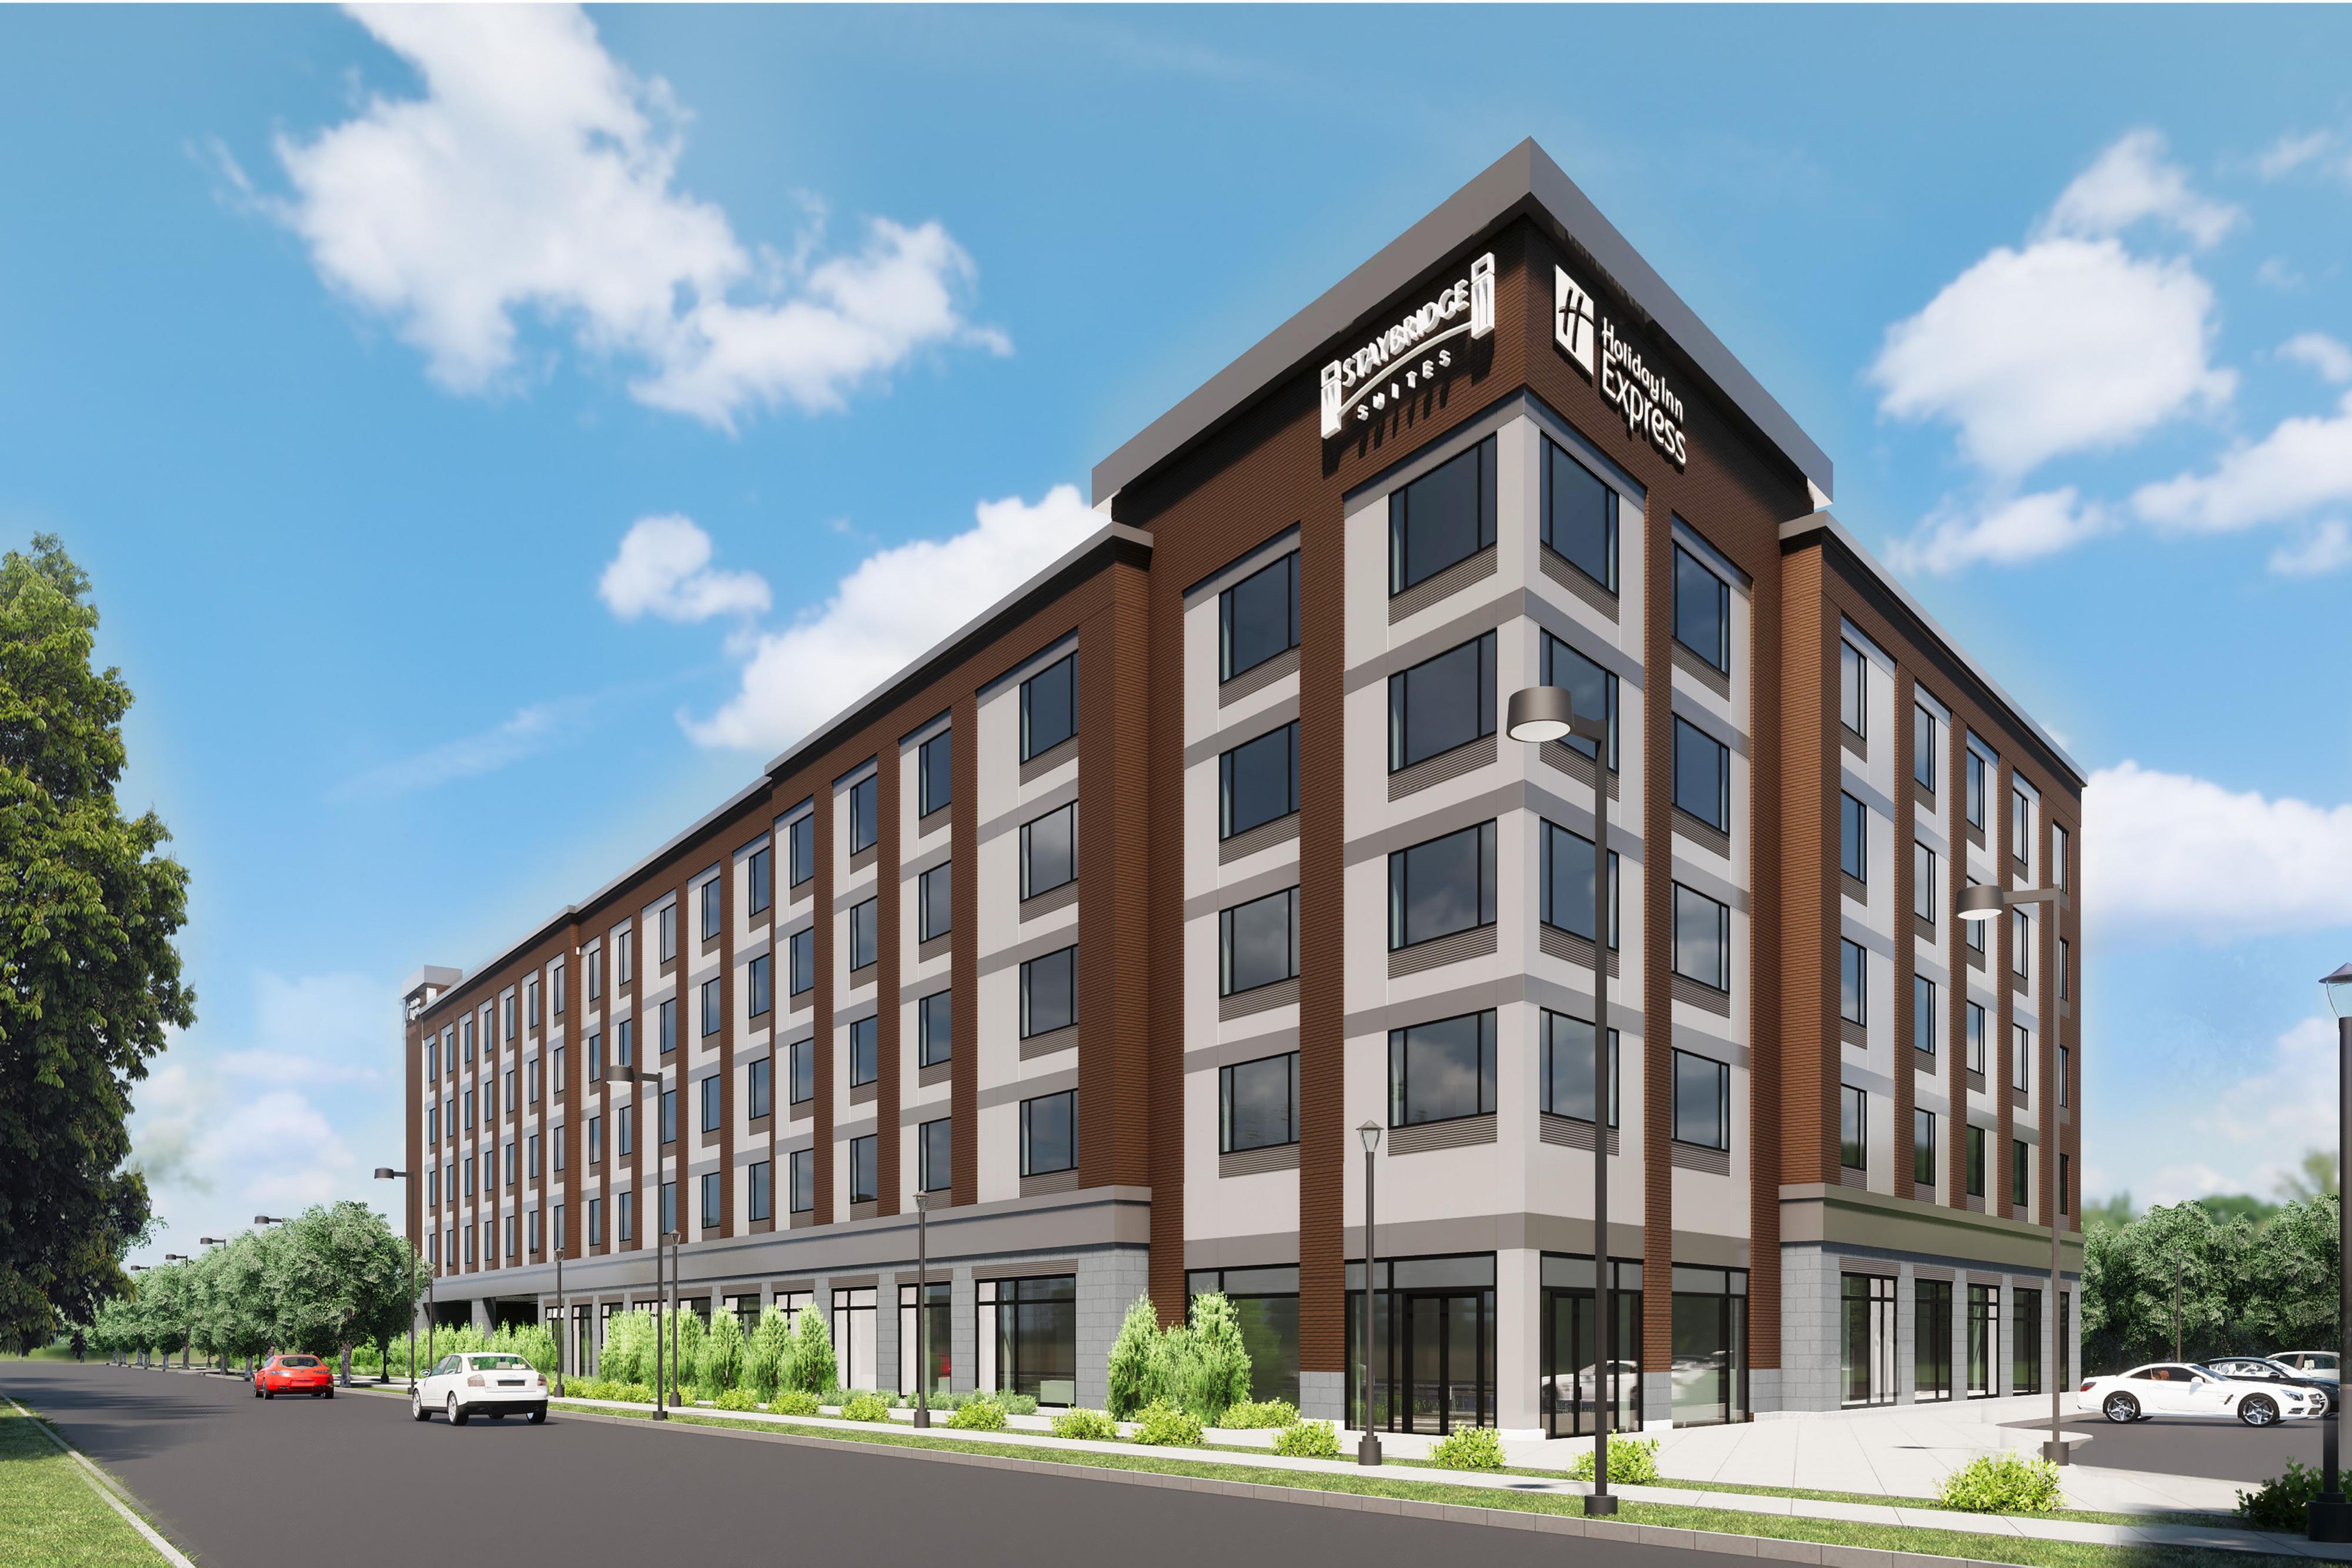 Located in Revere, MA and only five miles from downtown Boston, the all new IHG dual branded Staybridge Suites and Holiday Inn Express combine two lodging types with shared amenities under one roof.